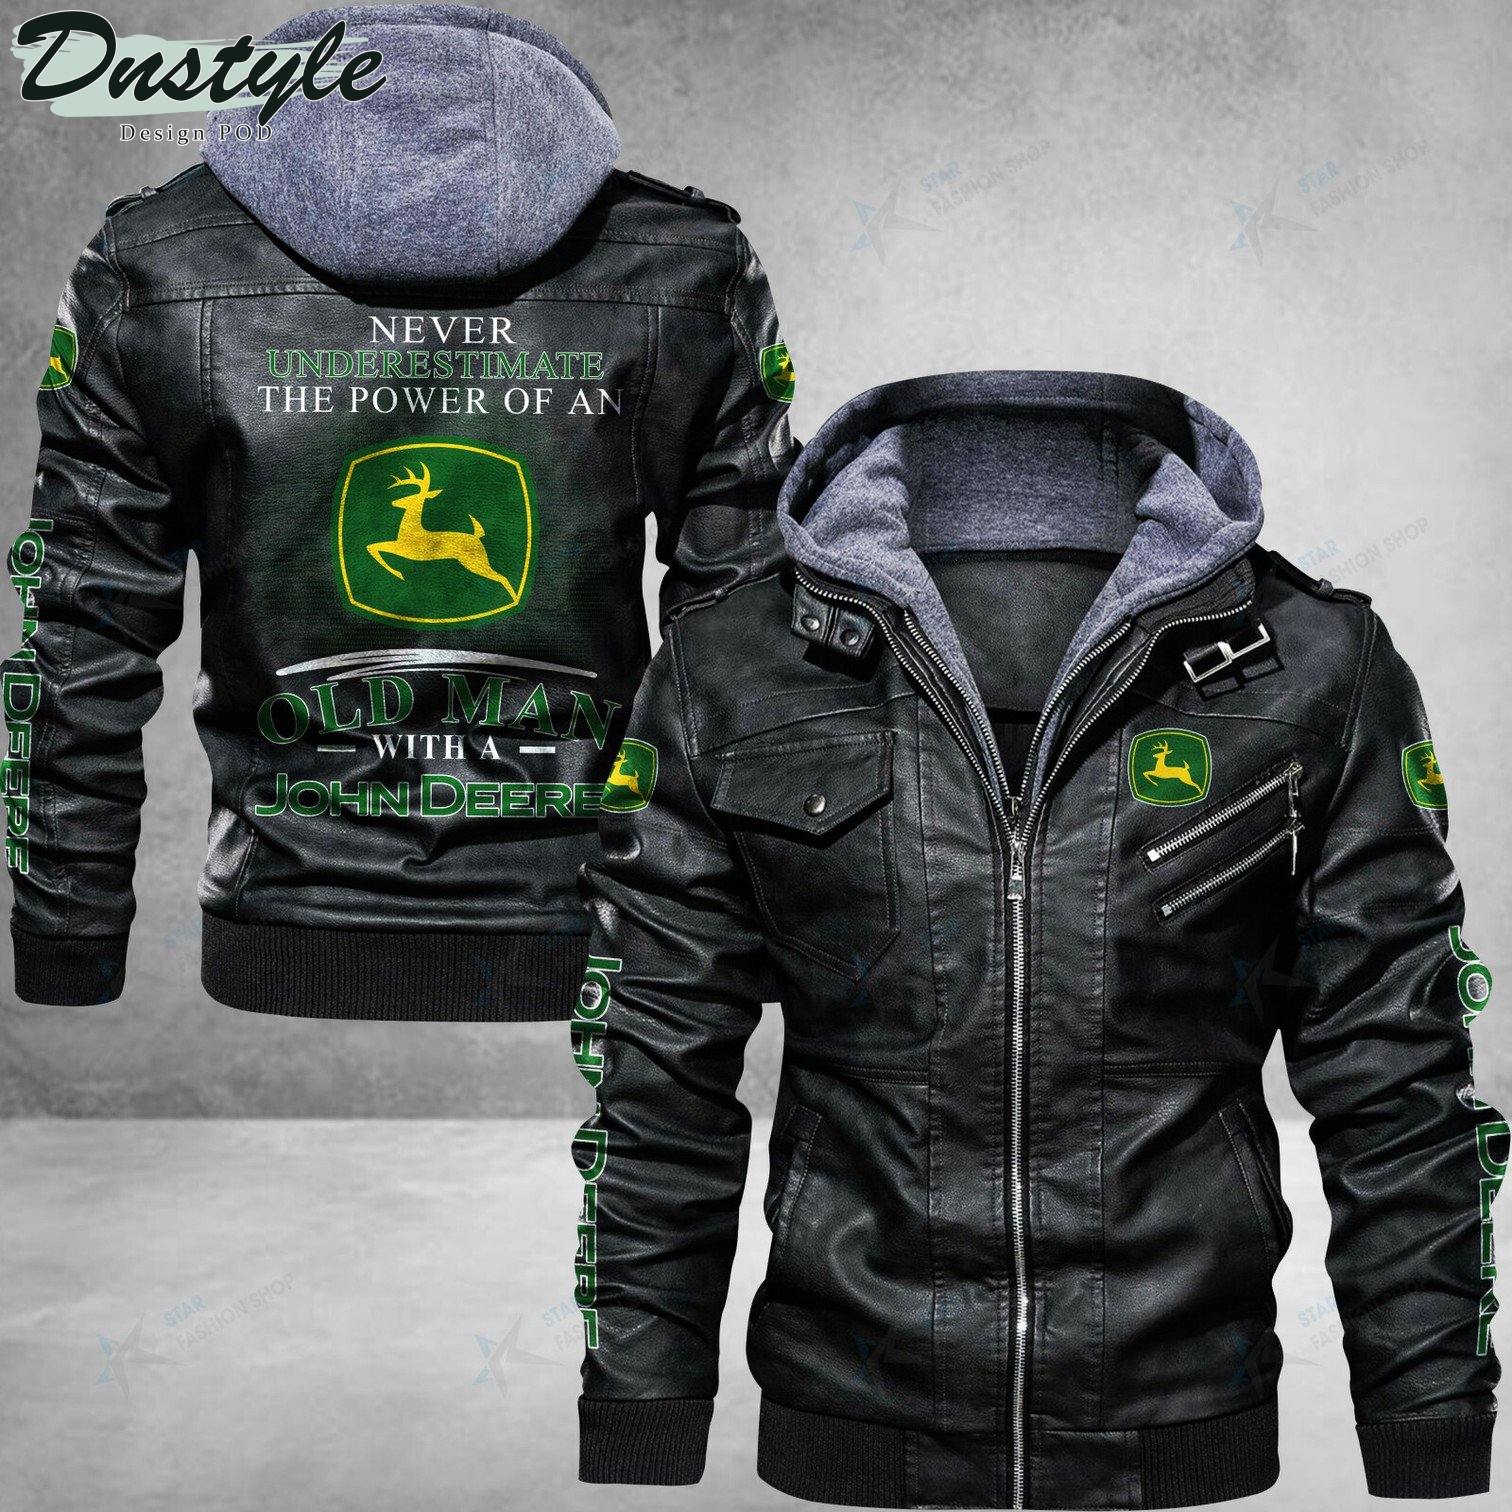 John Deere never underestimate the power of an old man leather jacket